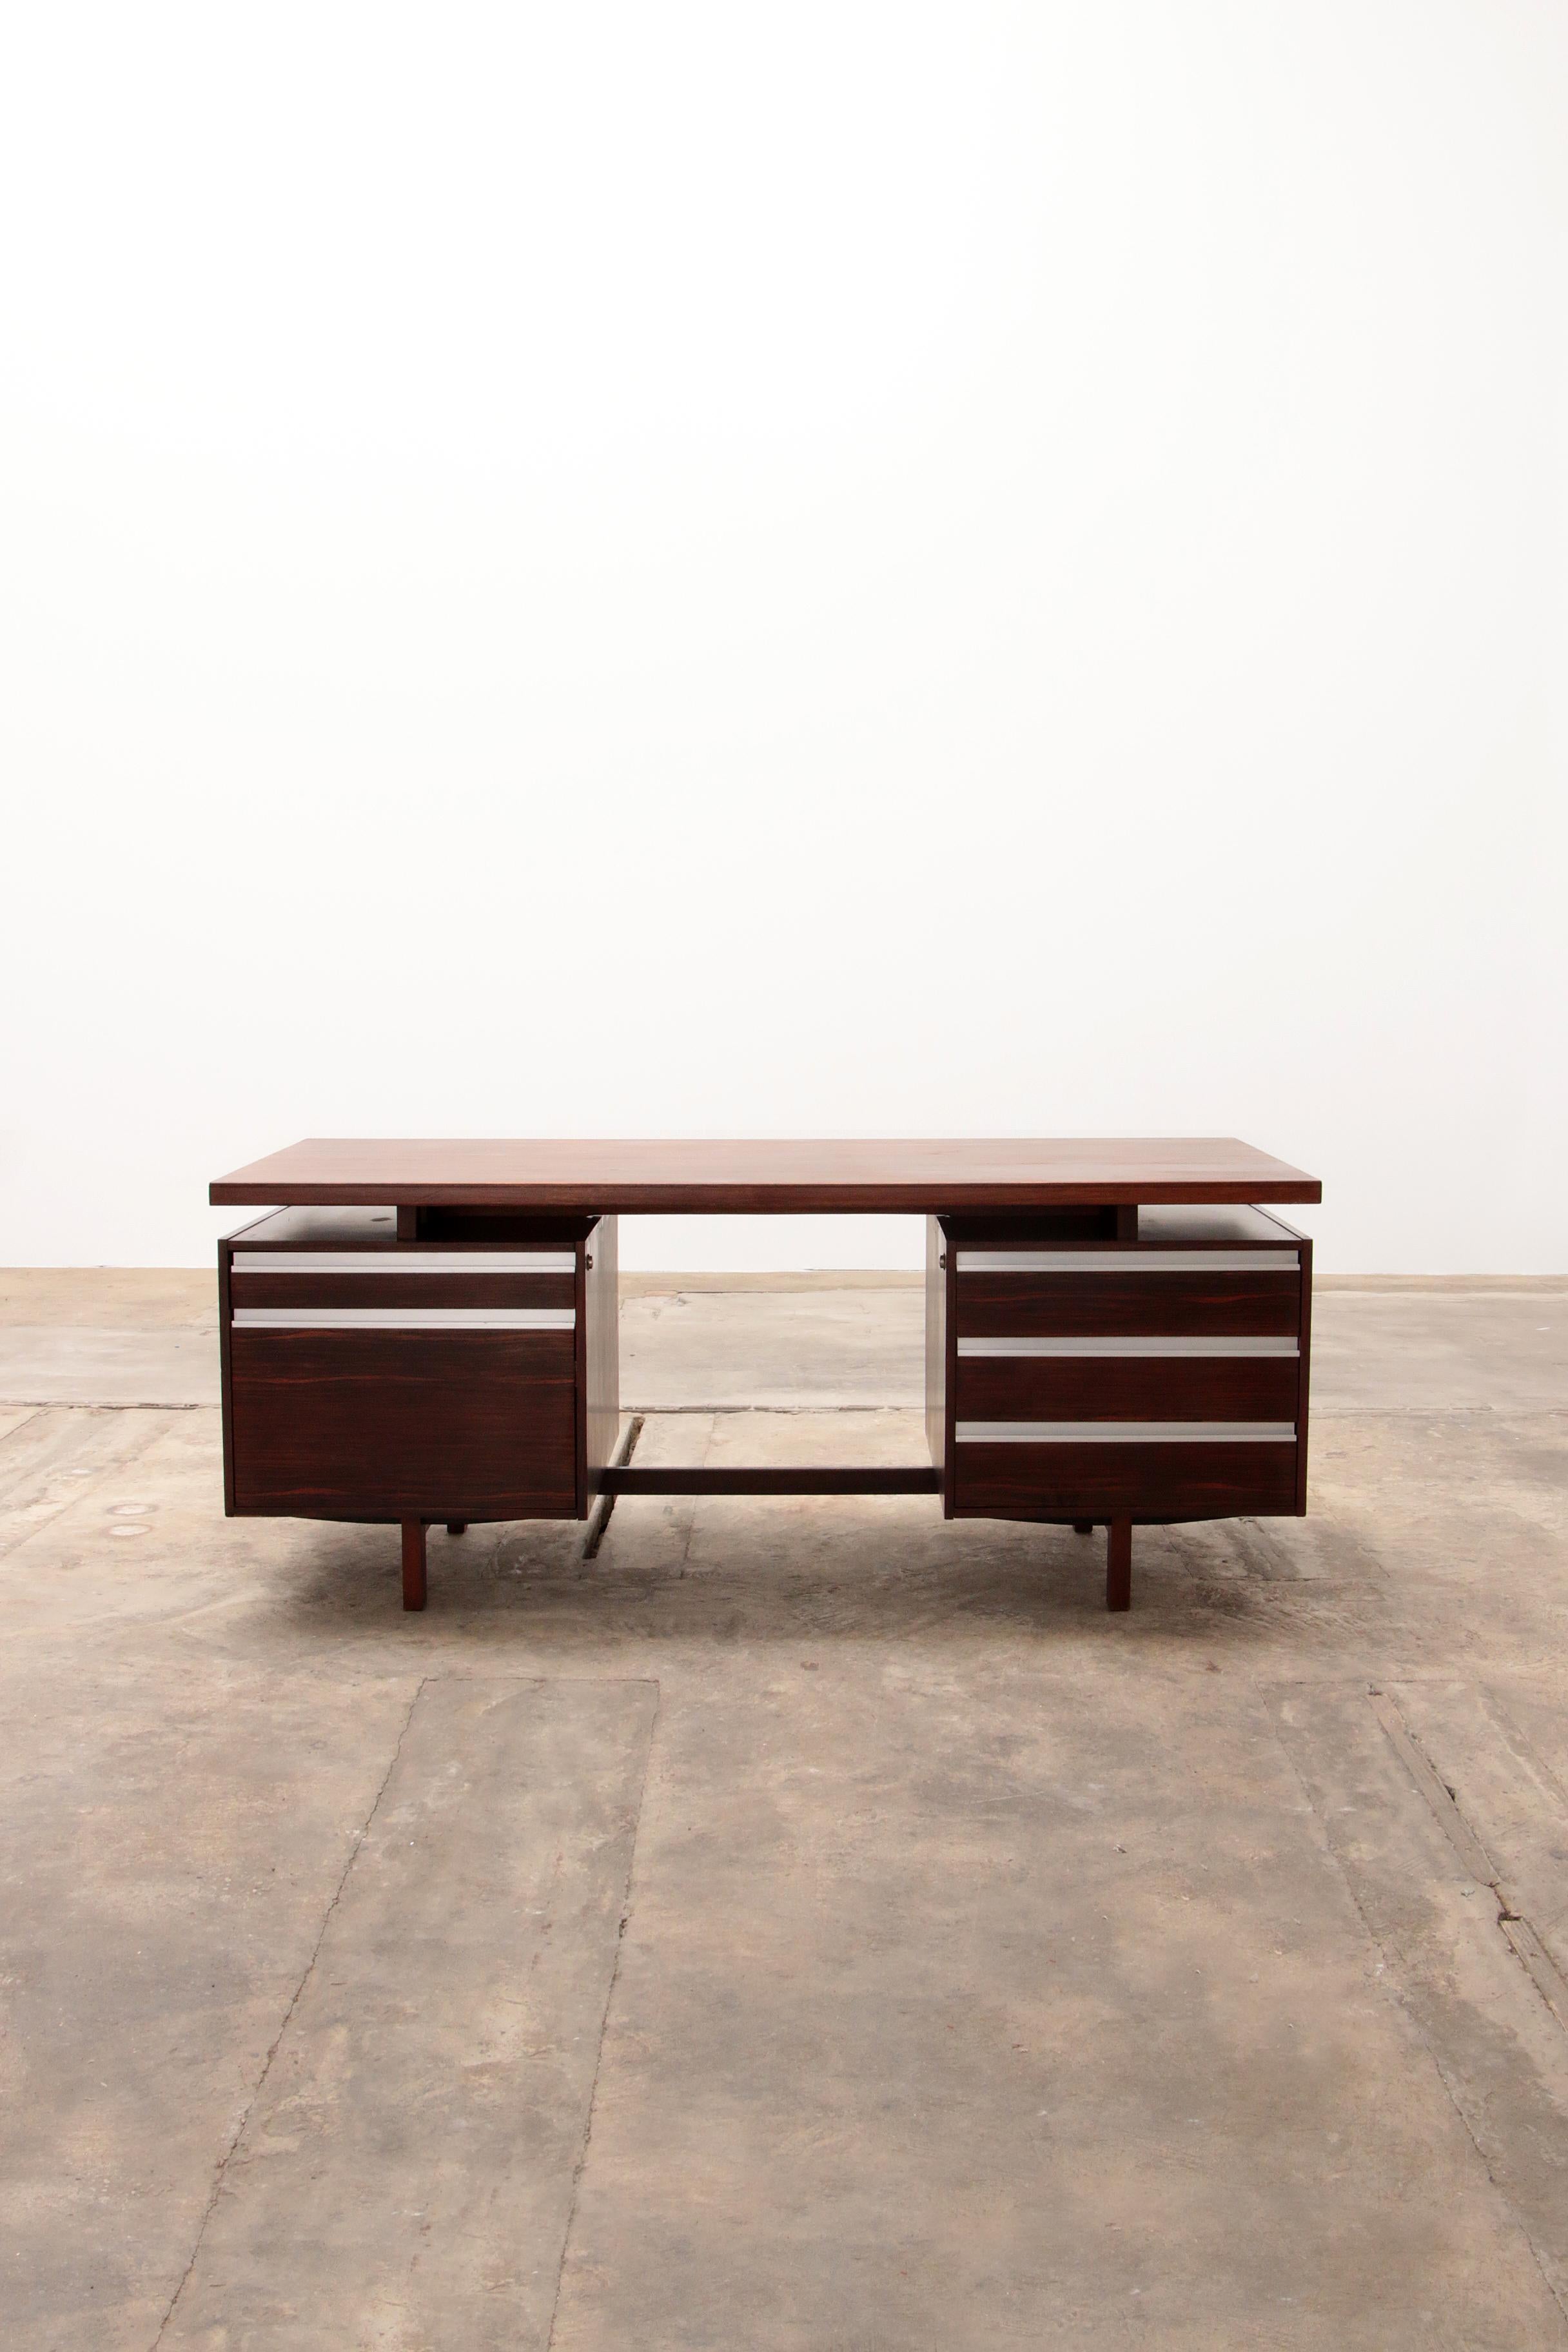 Rare executive desk model J1 designed by Kho Liang Ie for Fristho in 1956.

Executive desk made of wood and finished with solid wood between the top and the legs, the handles are made of aluminum.

The desk has open compartments at the back and